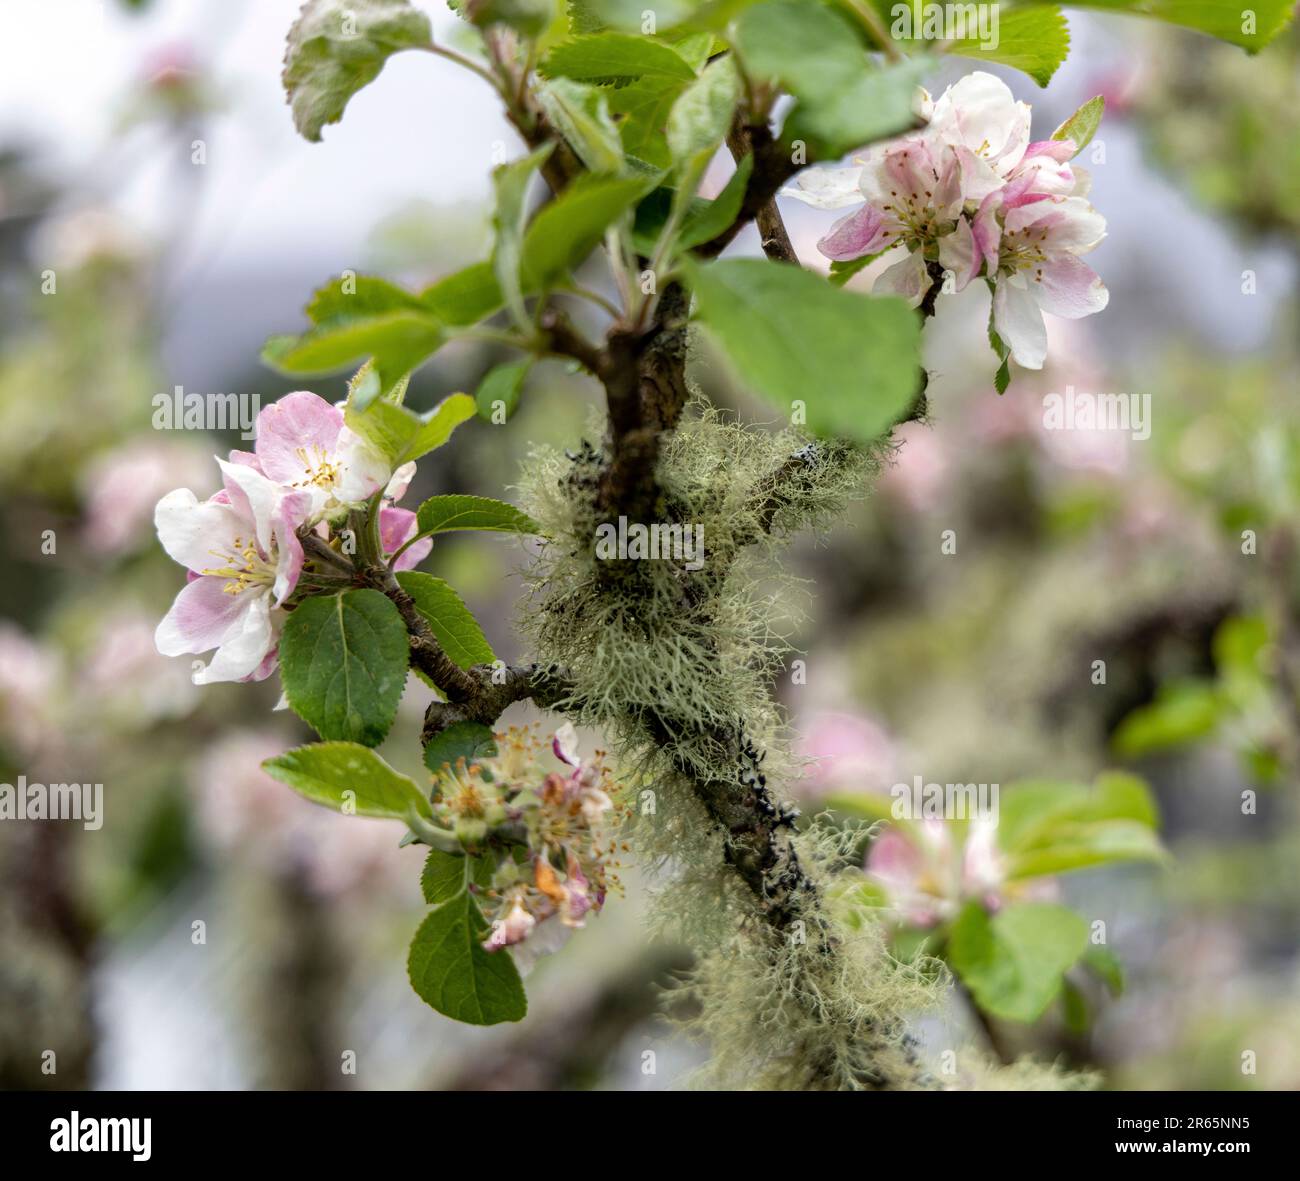 Apple tree with white and pastel-pink blossoms covered by moss in the  Walled Garden of Glenveagh Castle, Churchill, Co. Donegal, Republic of Ireland. Stock Photo